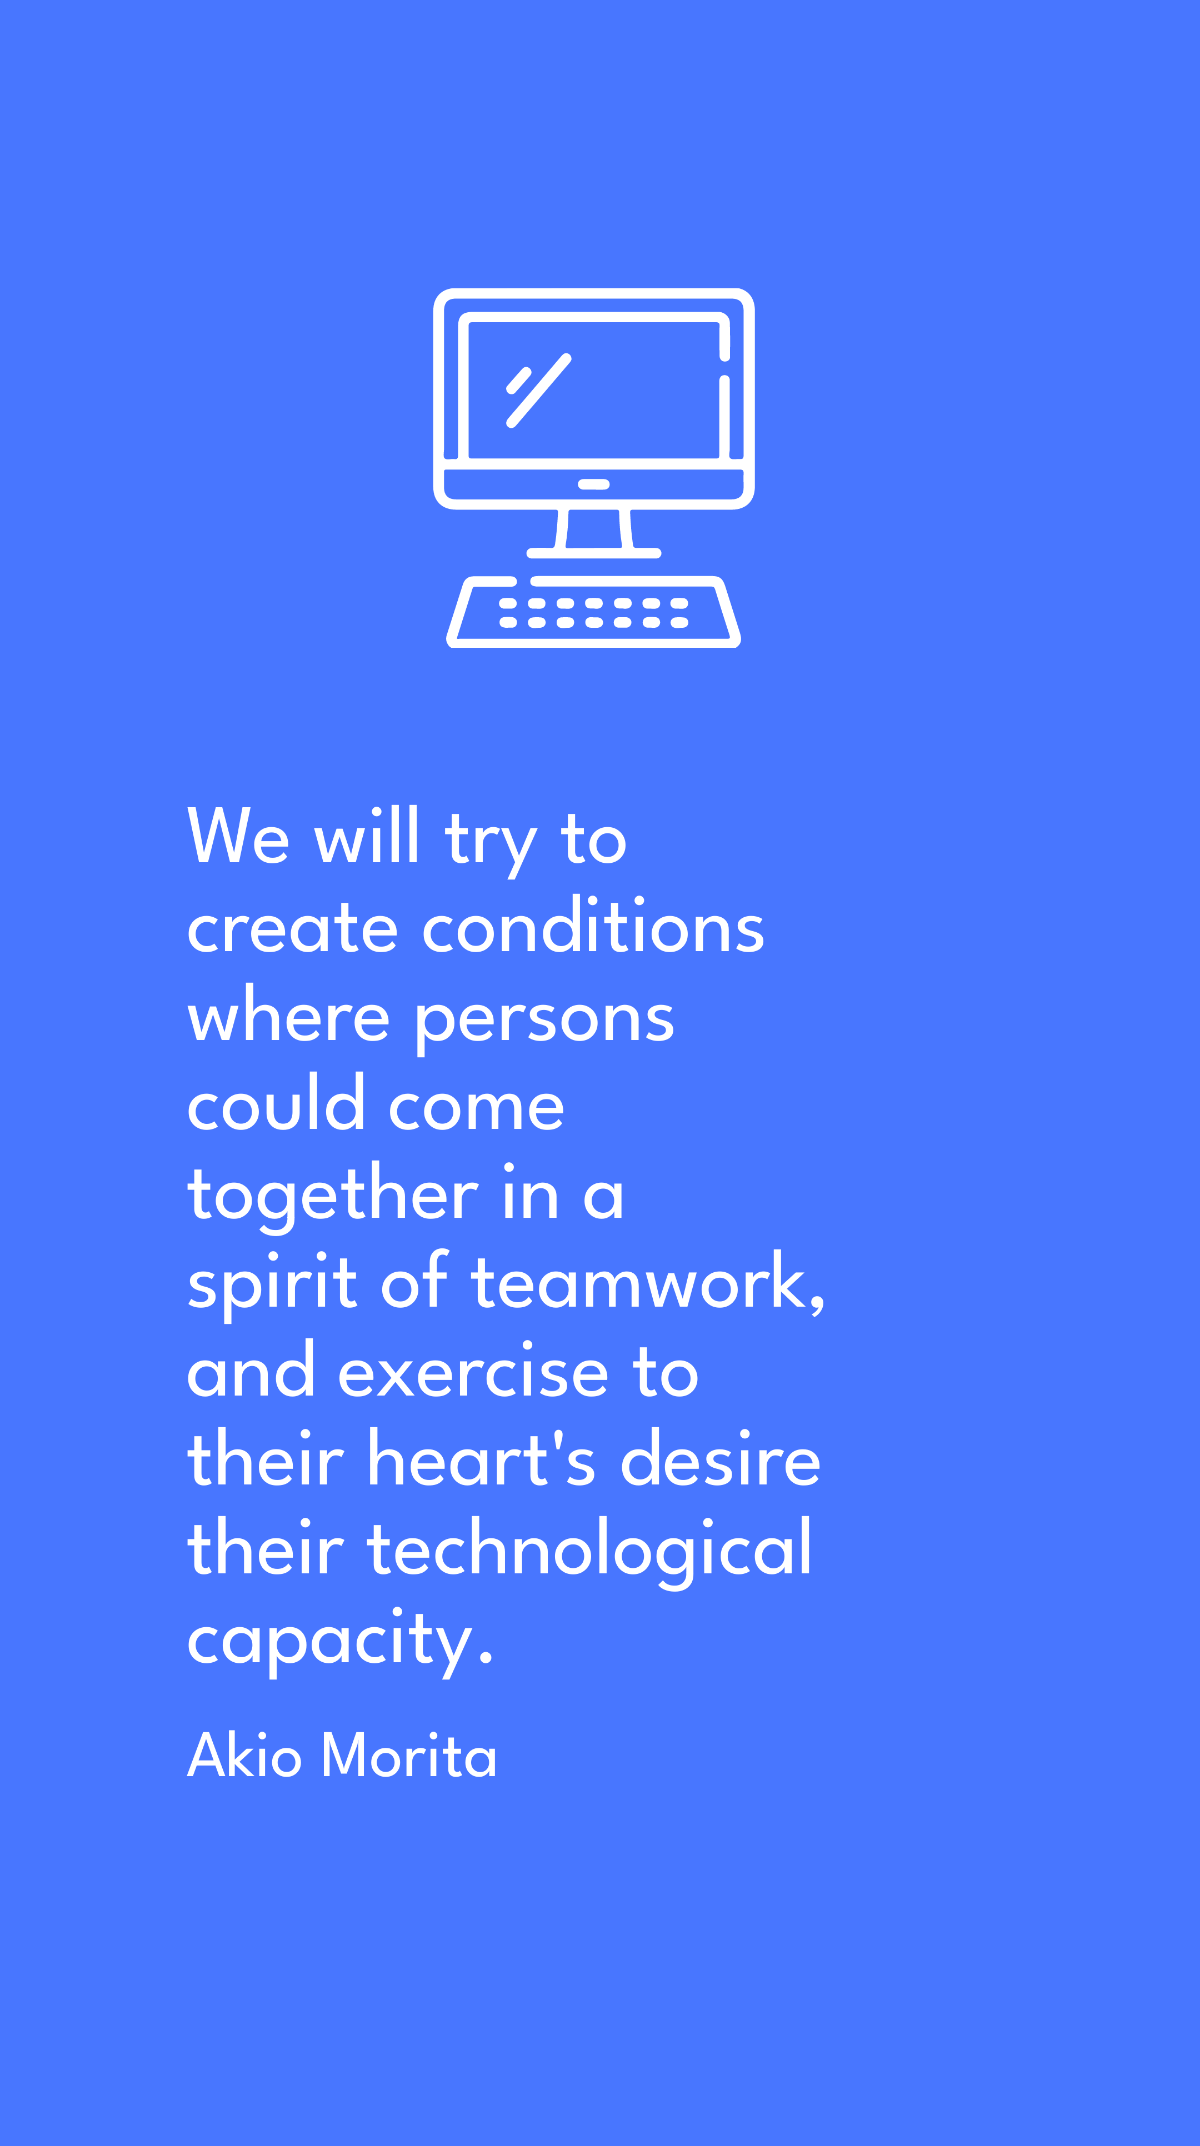 Akio Morita - We will try to create conditions where persons could come together in a spirit of teamwork, and exercise to their heart's desire their technological capacity. Template